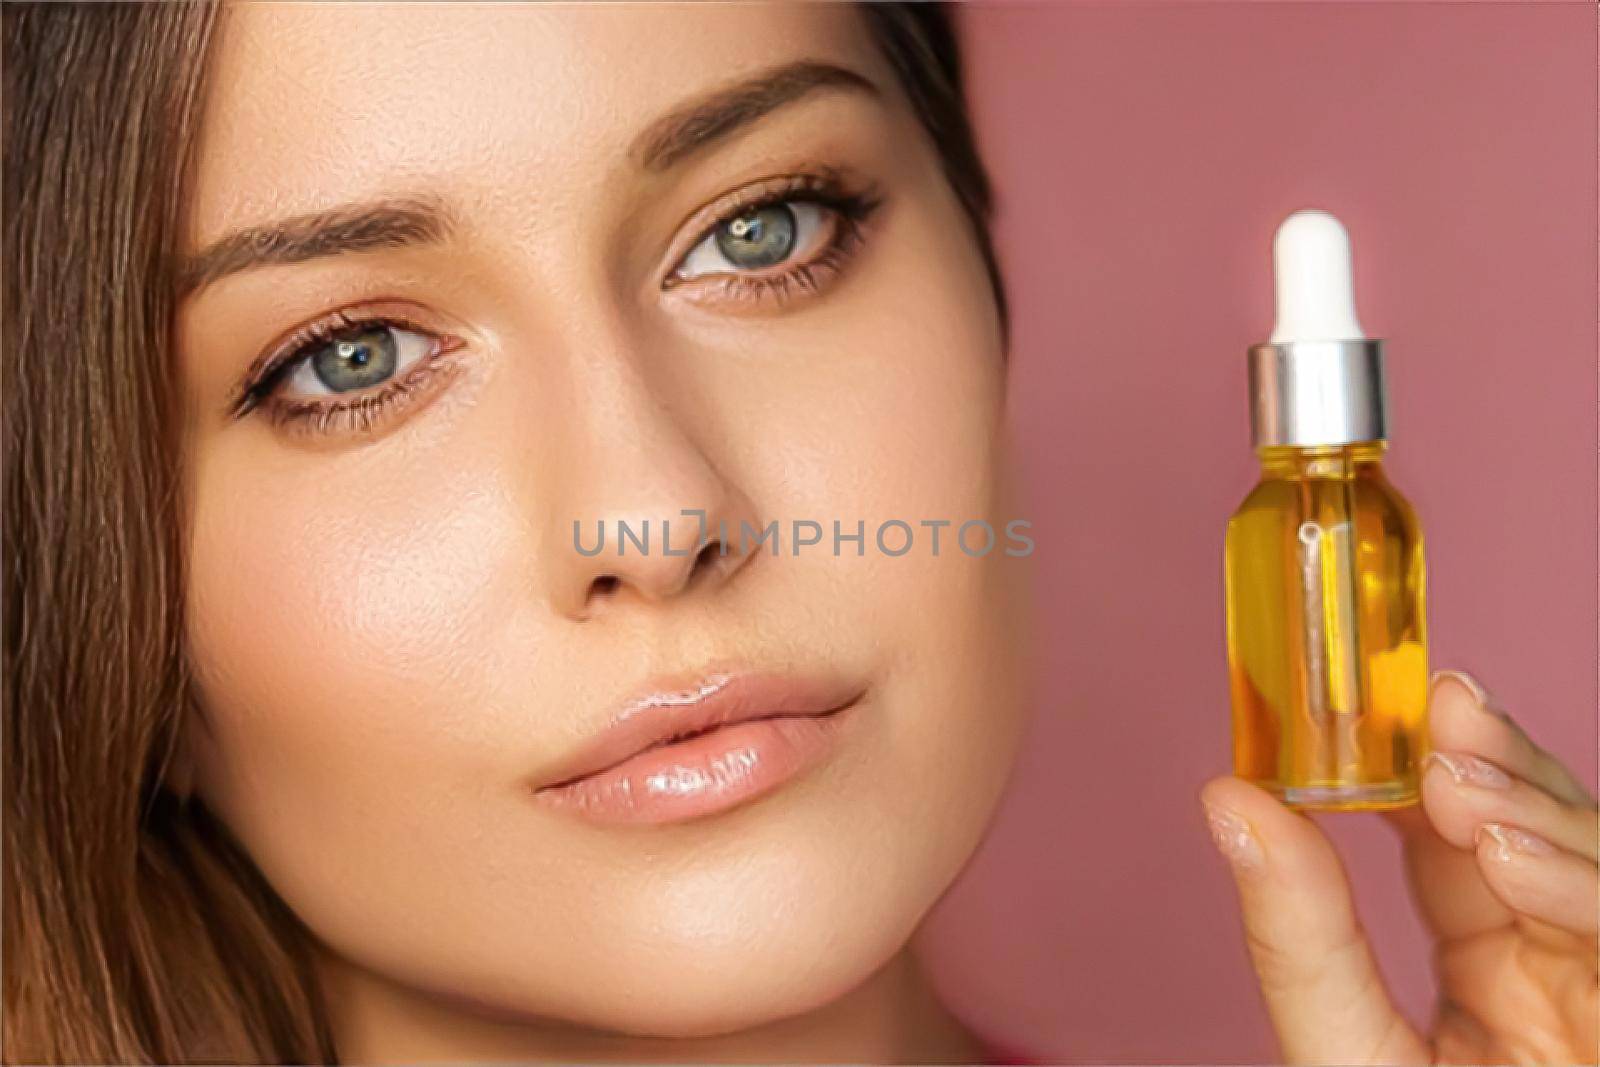 Beauty, makeup and skincare cosmetics model face portrait, woman holding skin care cosmetic essential oil bottle with dropper, luxury facial care product mockup